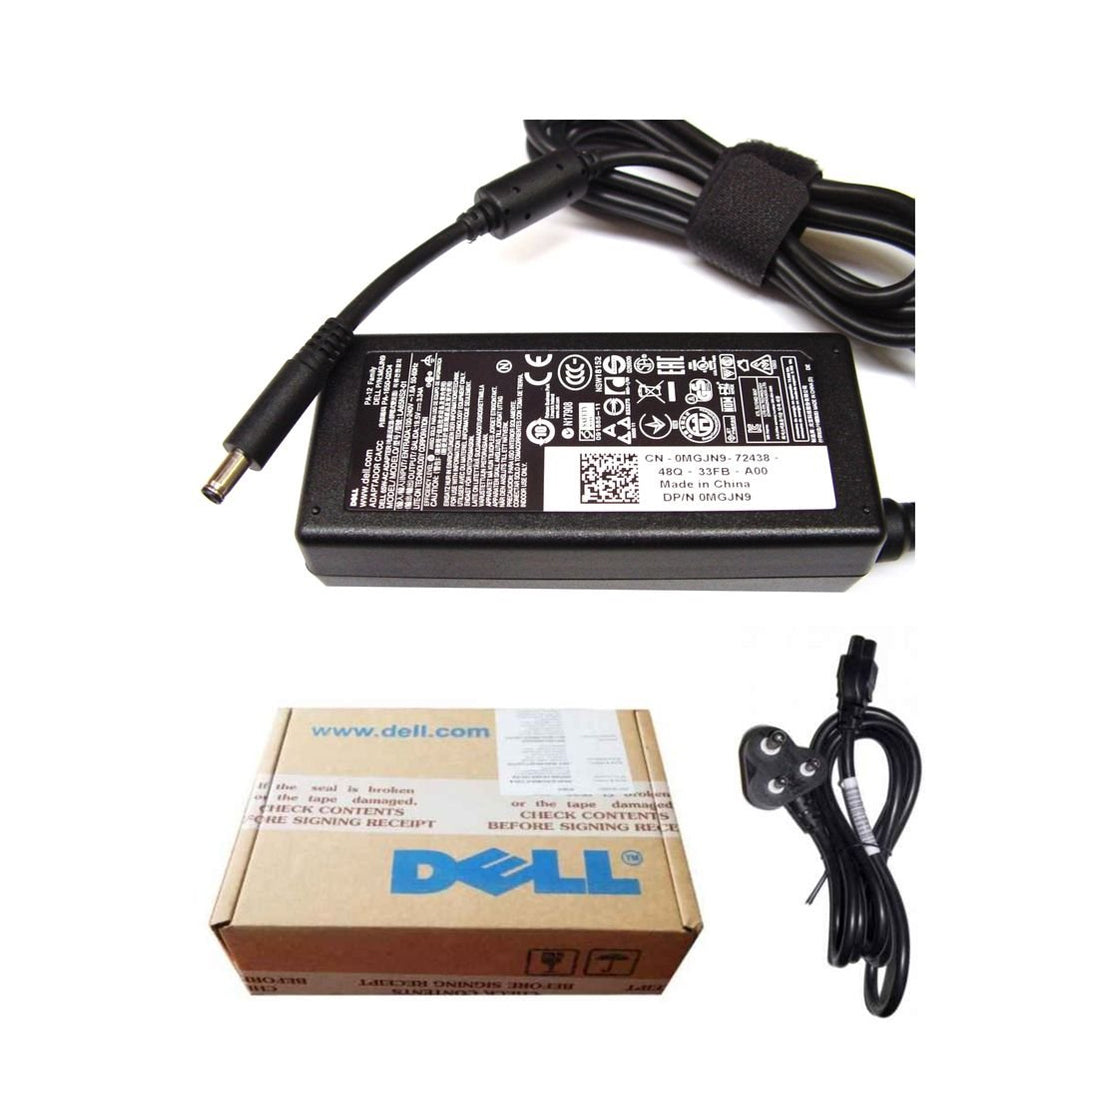 Dell Original 65W 19.5V 4.5mm Pin Laptop Charger Adapter for Vostro 15 3562 With Power Cord